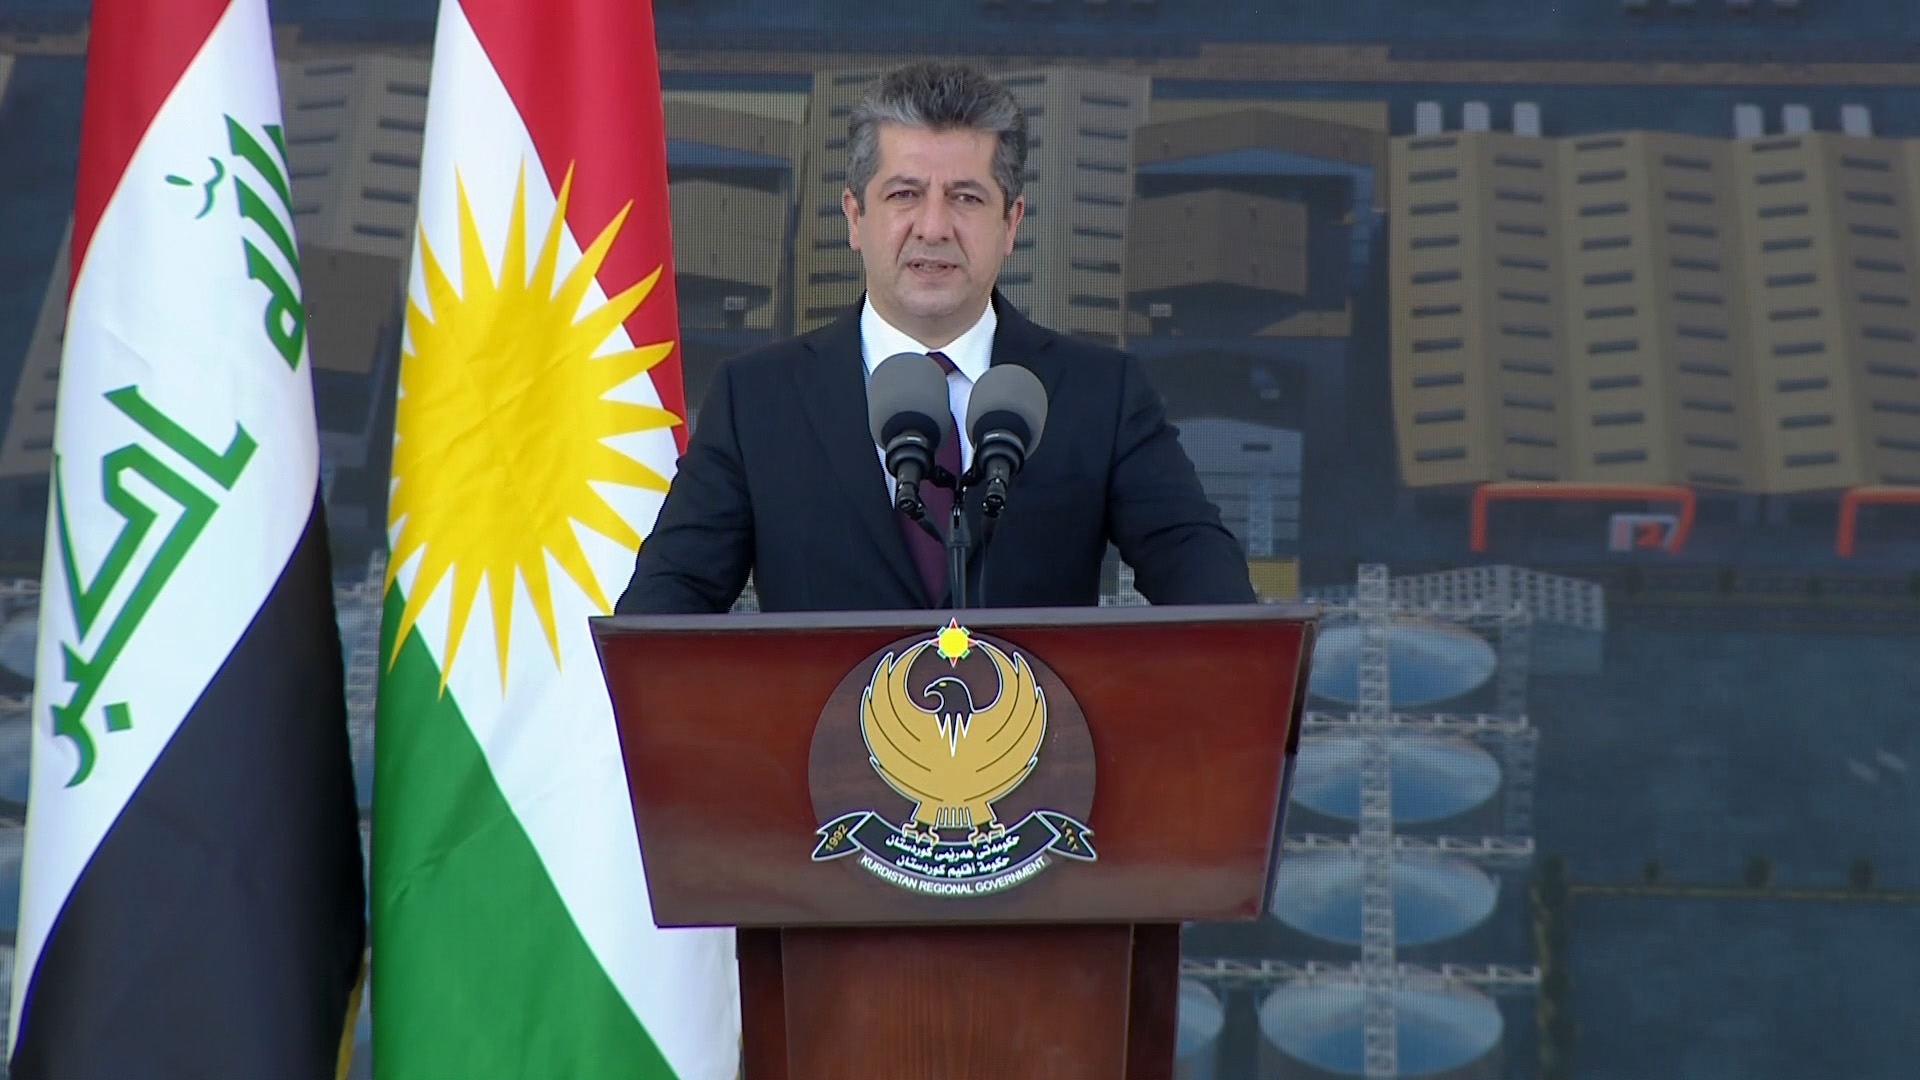 Masrour Barzani, Kurdistan Region’s Prime Minister during his speech in Duhok in a ceremony to lay the foundation stone for wheat marketing project, Sept. 20, 2021. (Photo: Kurdistan 24)